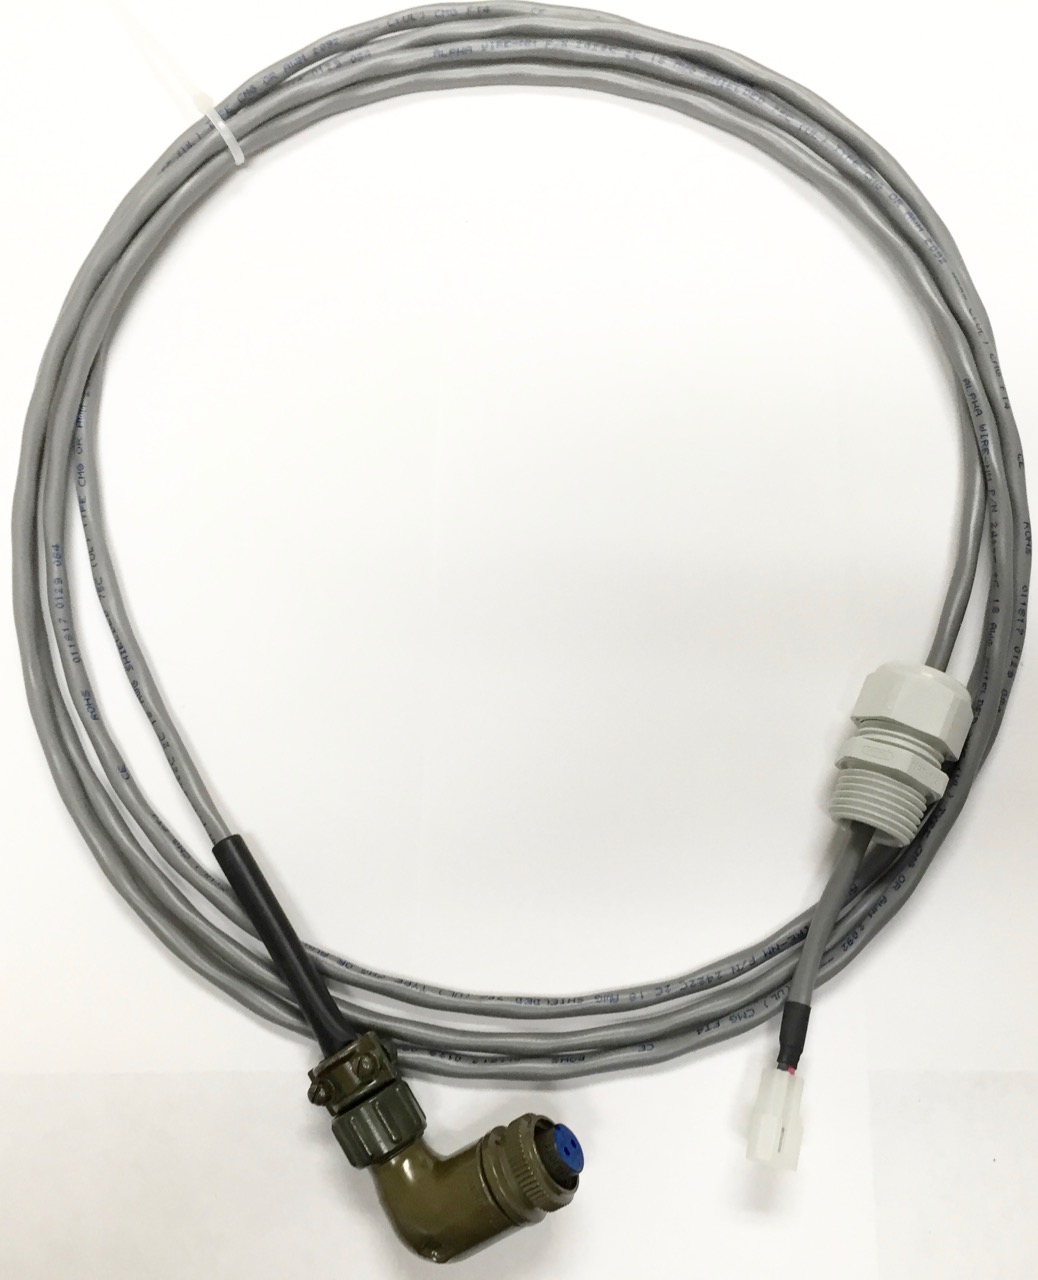 TI 10' Cable Assembly with 90º Amphenol Connector (10354-01/10)